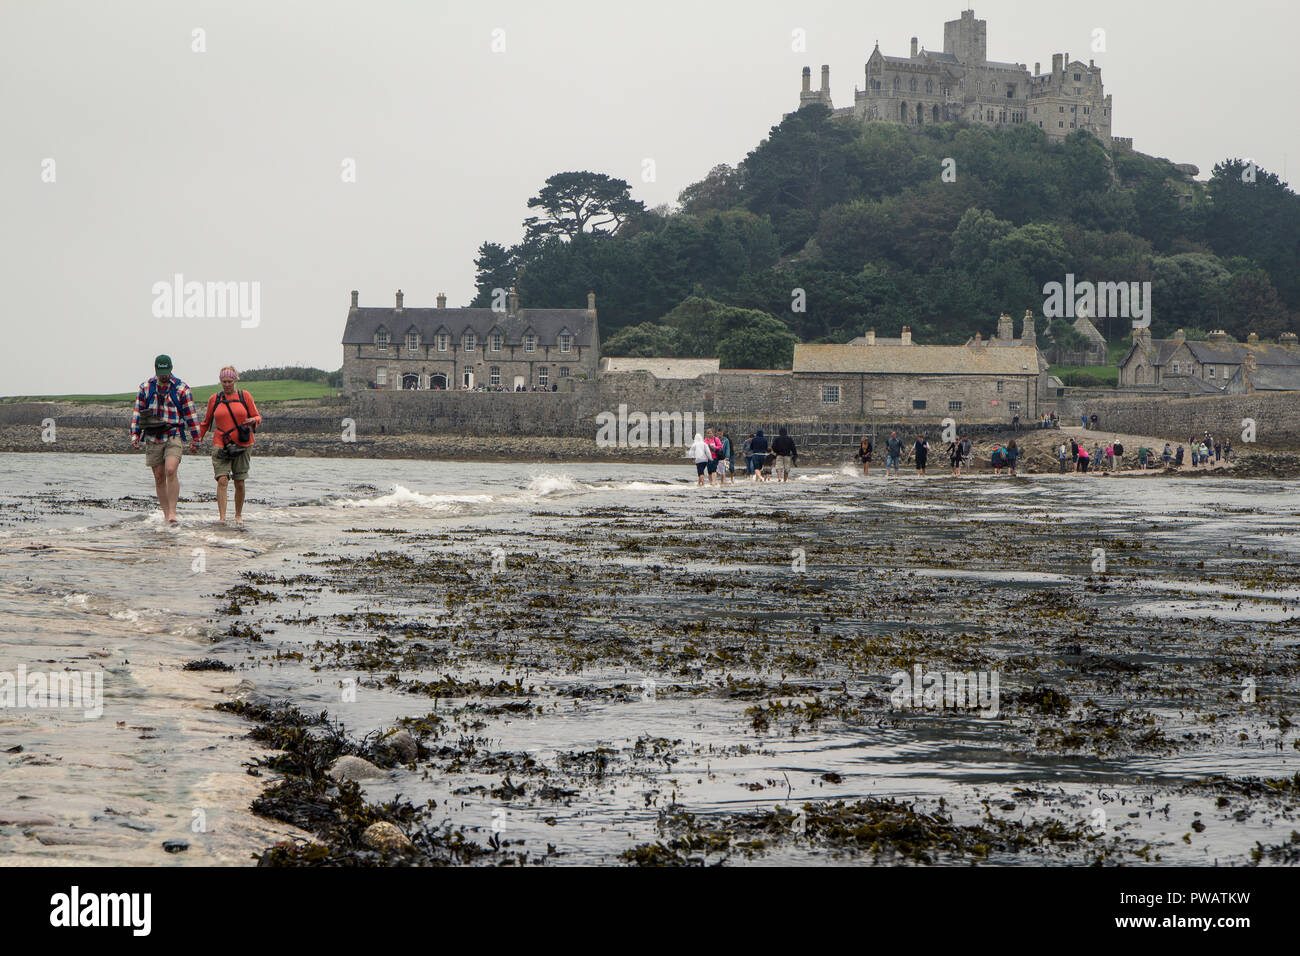 Tourists crossing the causeway to St. Michael's Mount while it becomes flooded by the high tide, Cornwall, UK Stock Photo